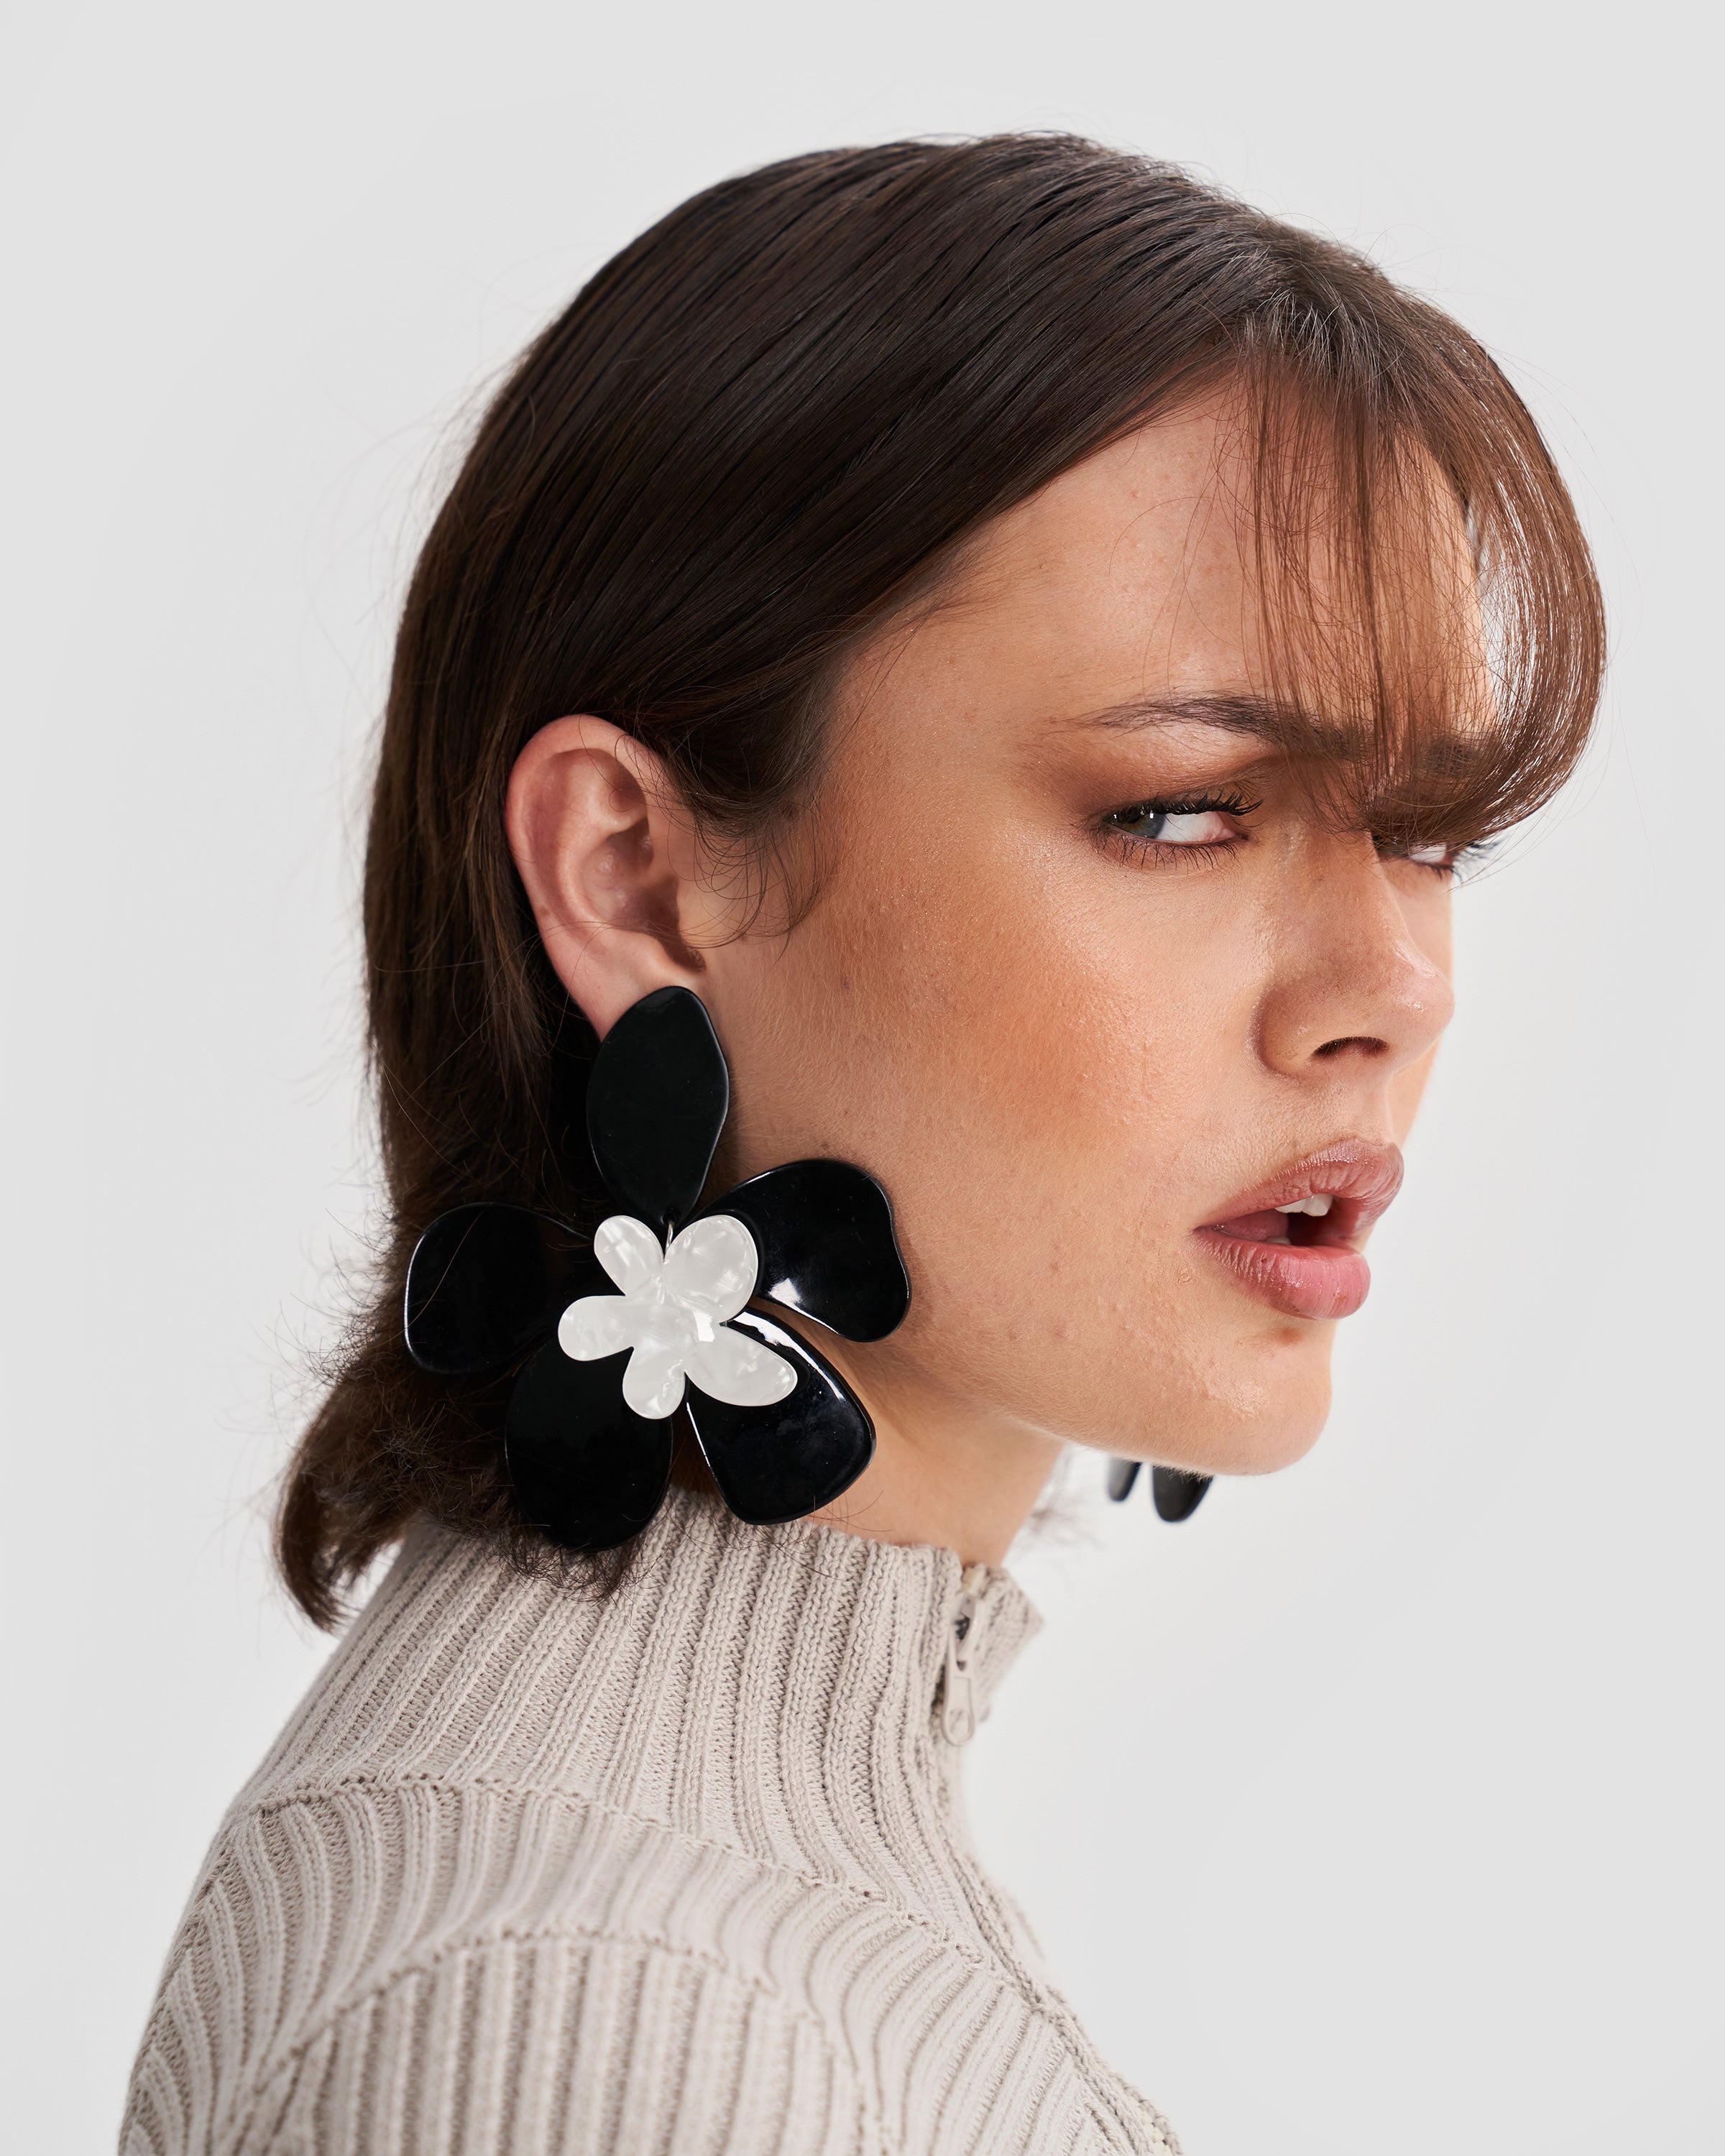 Statement Oversized Flower Earrings in Black and White